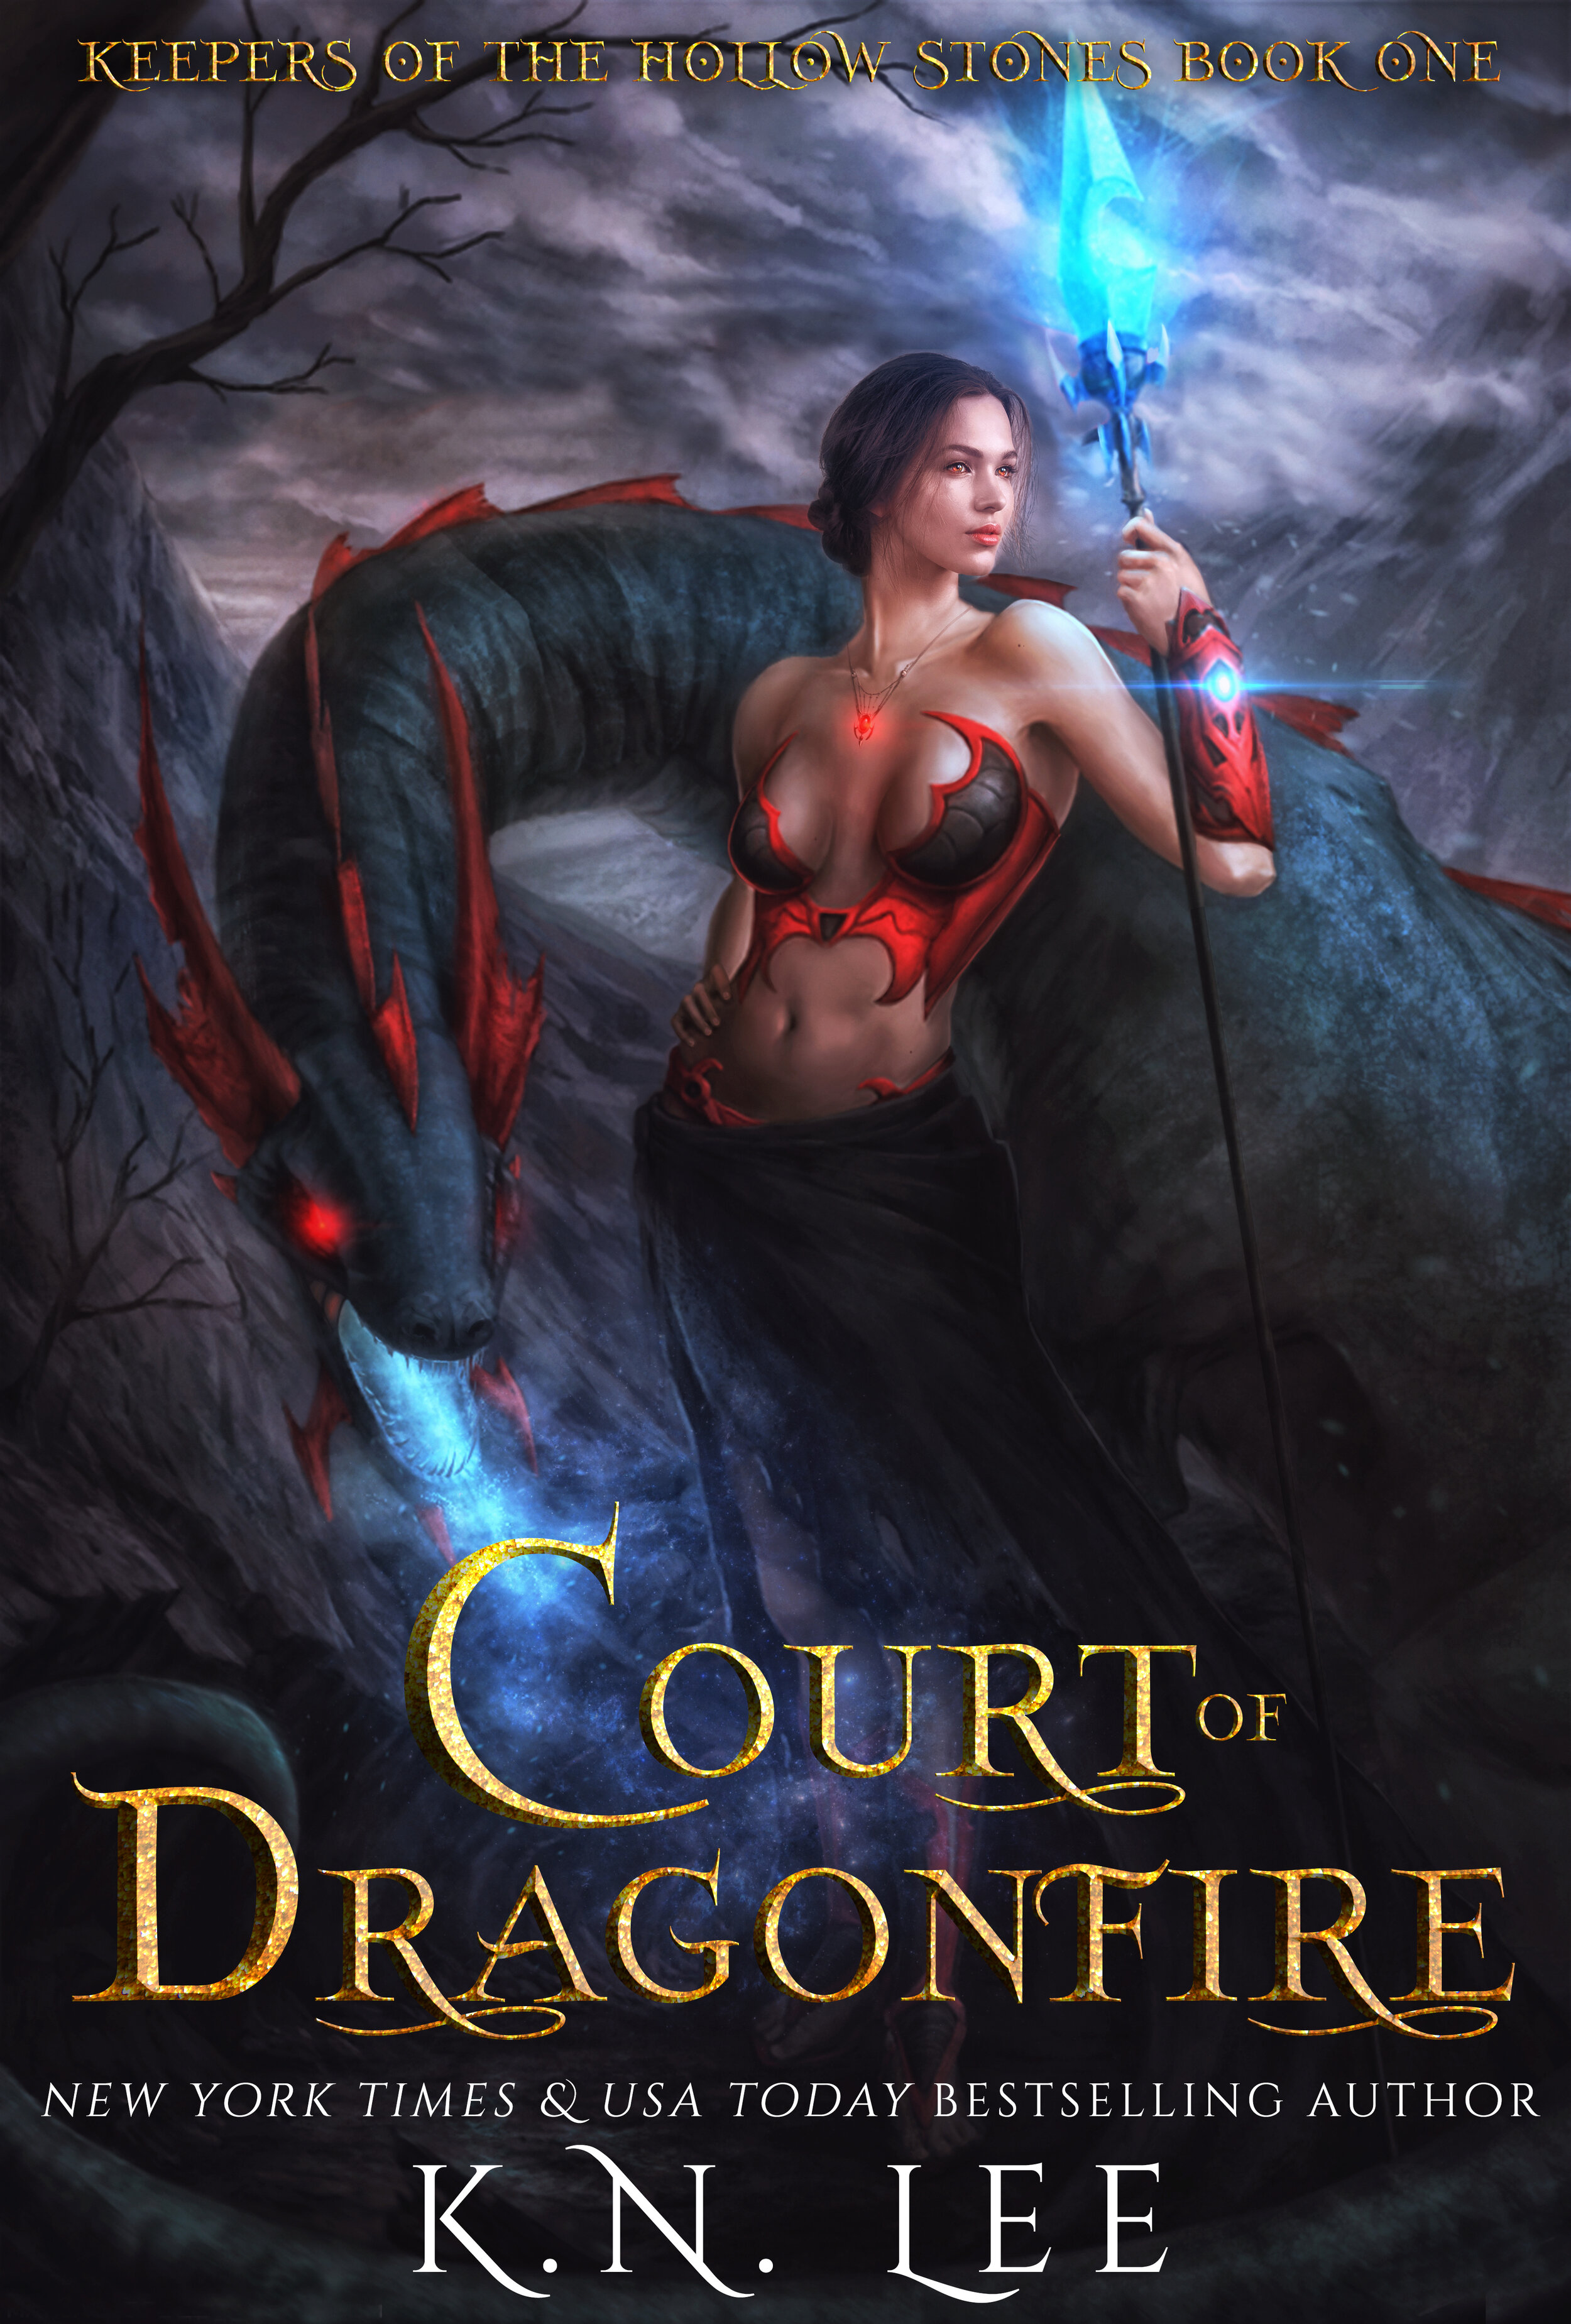 Court of Dragonfire - KN LEE - on top.jpg